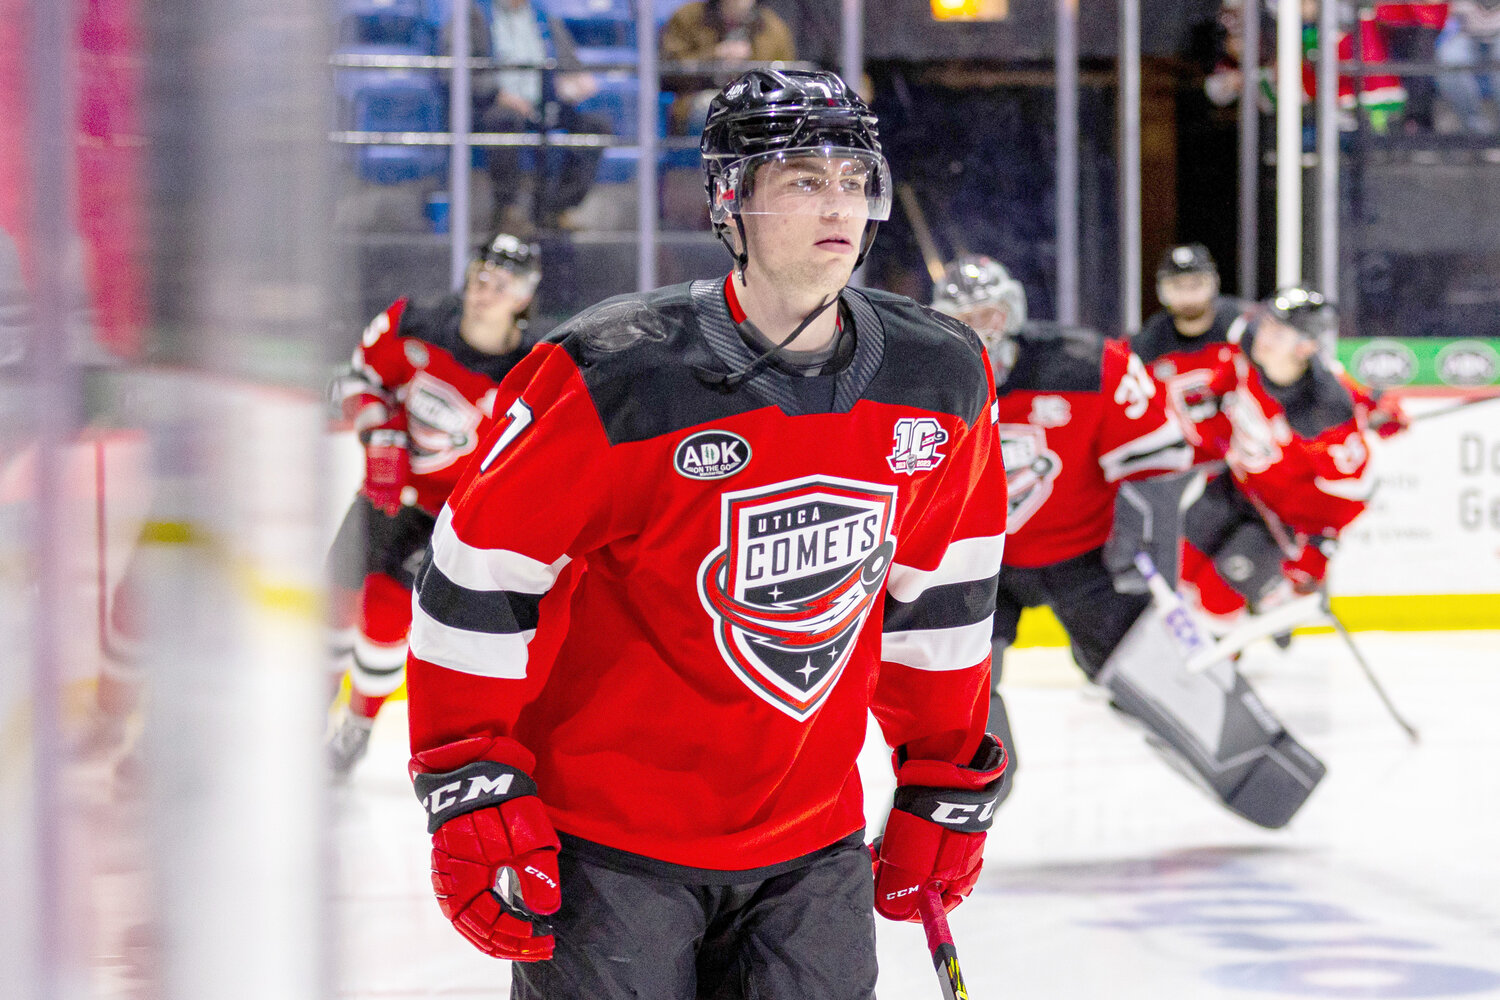 Simon Nemec, a top New Jersey Devils prospect, has goals in his last three games with the Utica Comets. The team is set for three games this week against Belleville and Laval in Canada as the playoff push continues.